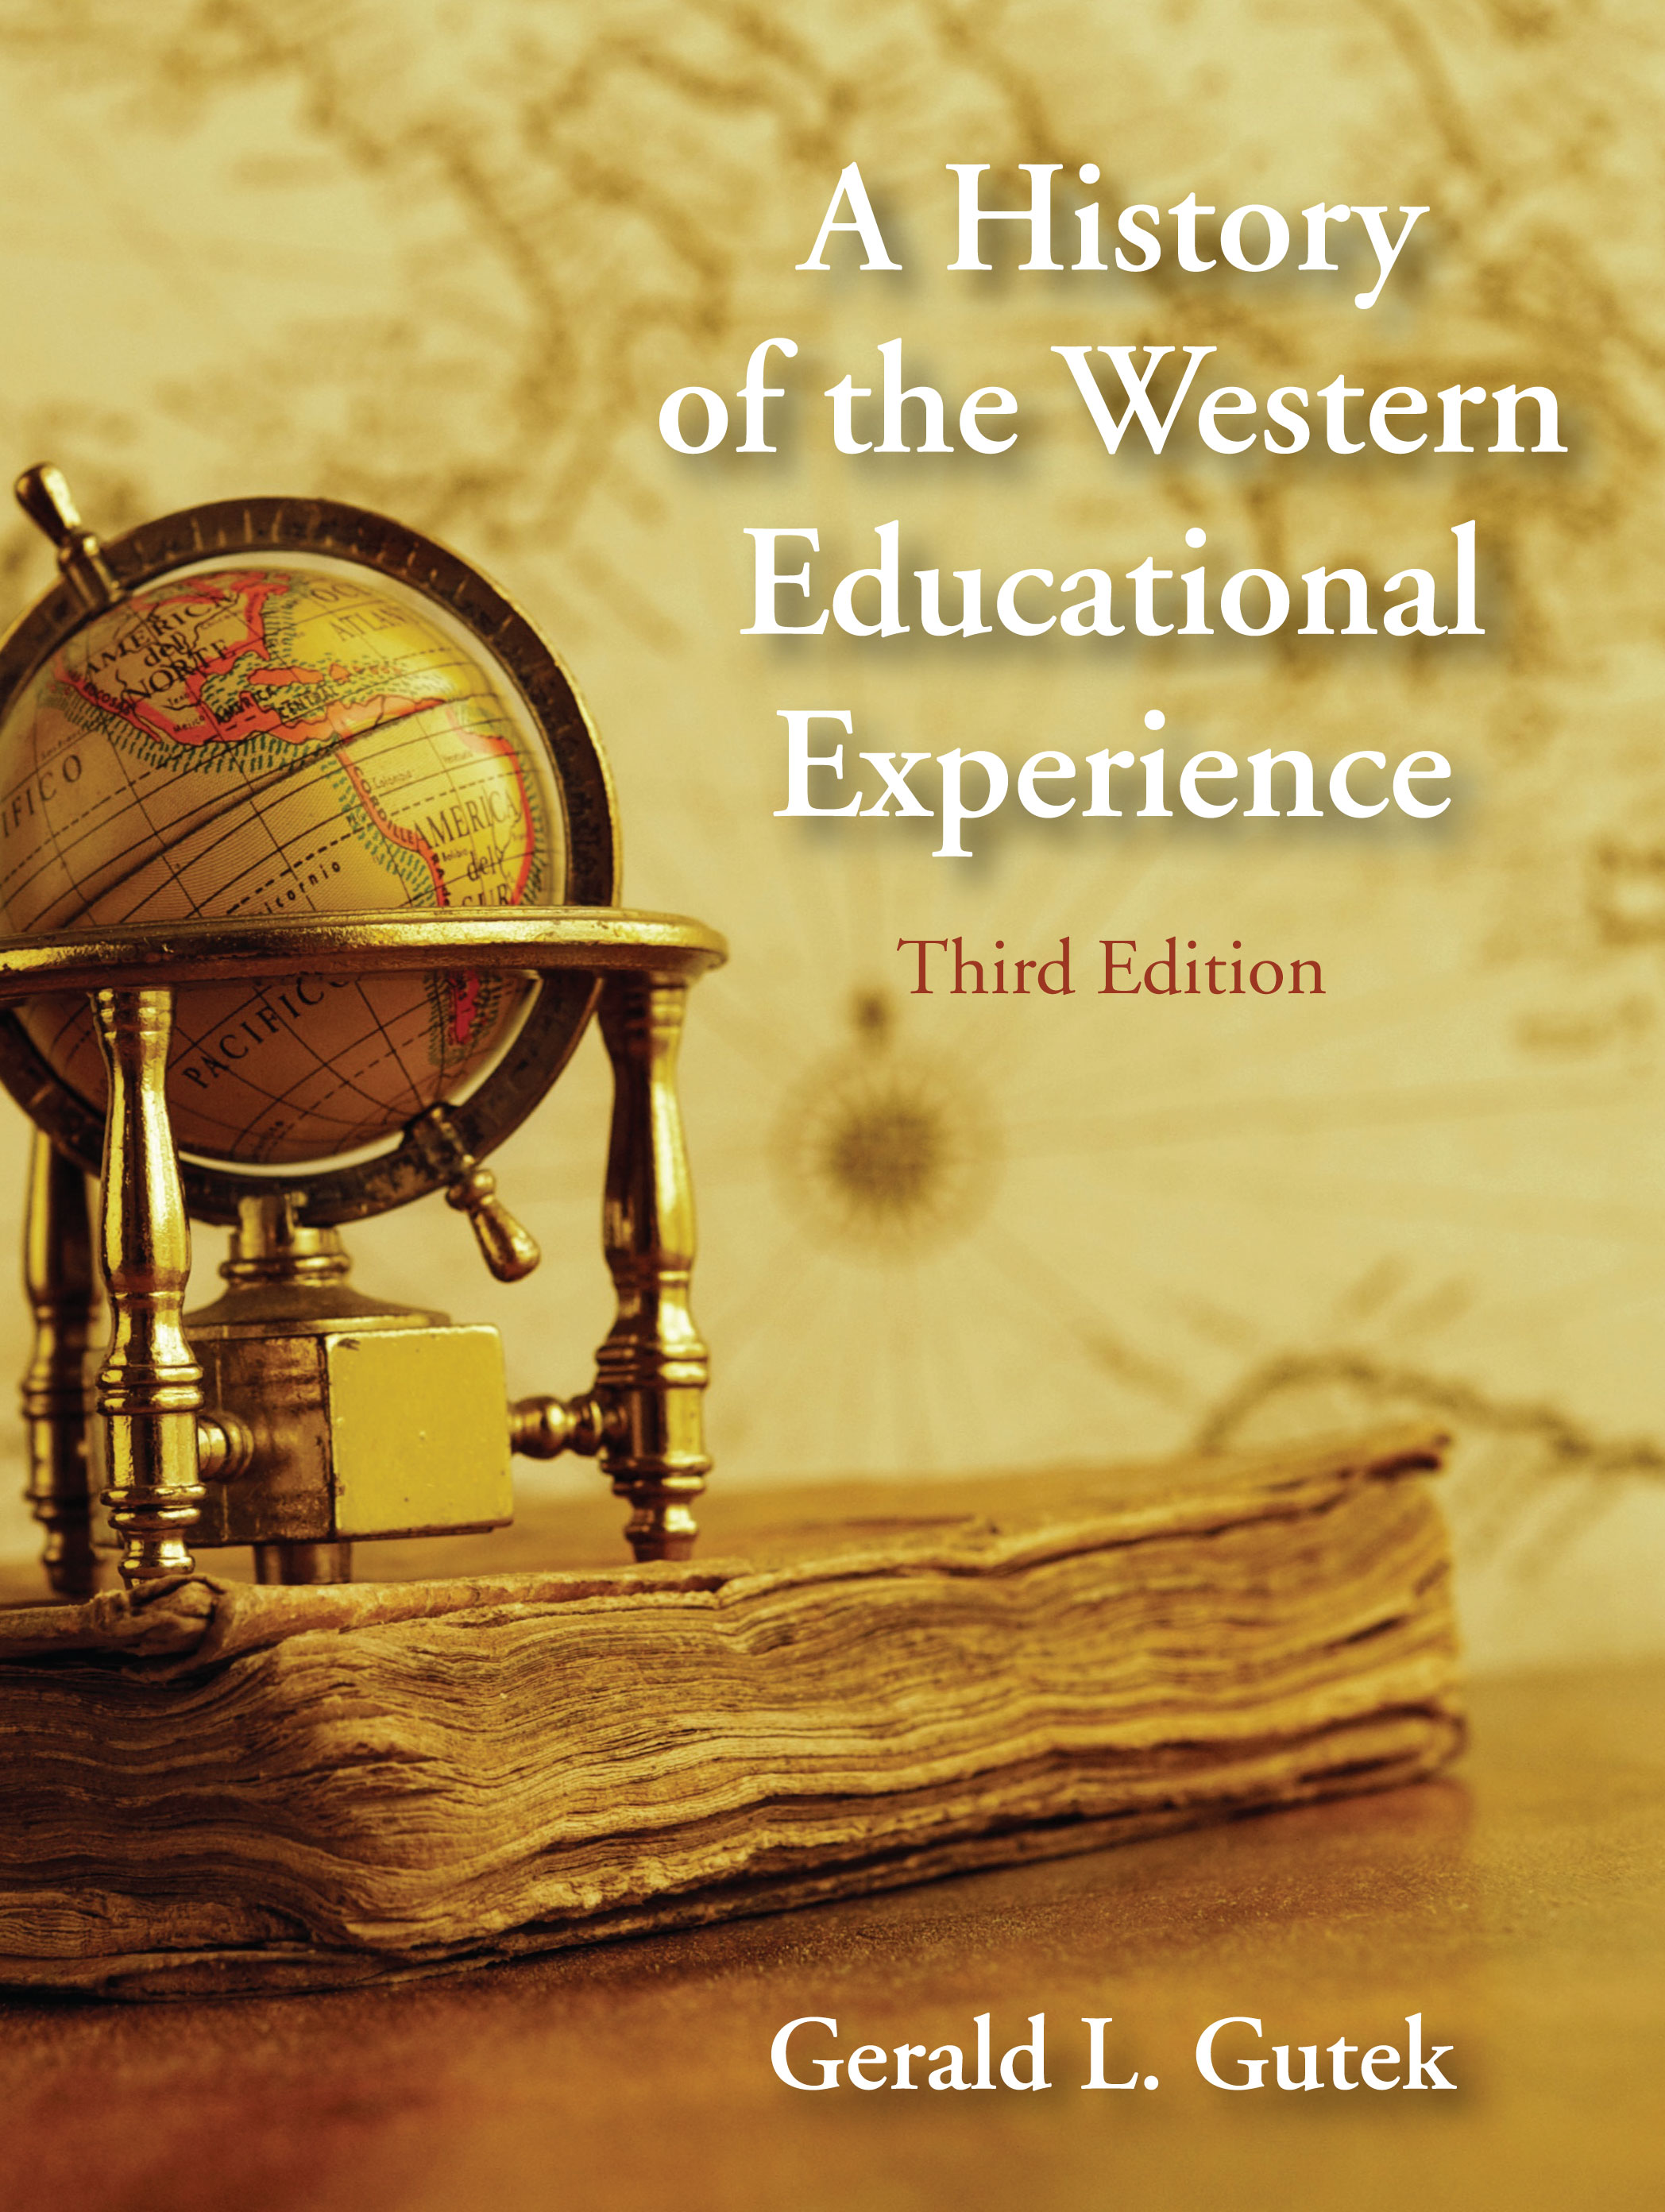 A History of the Western Educational Experience:  by Gerald L. Gutek